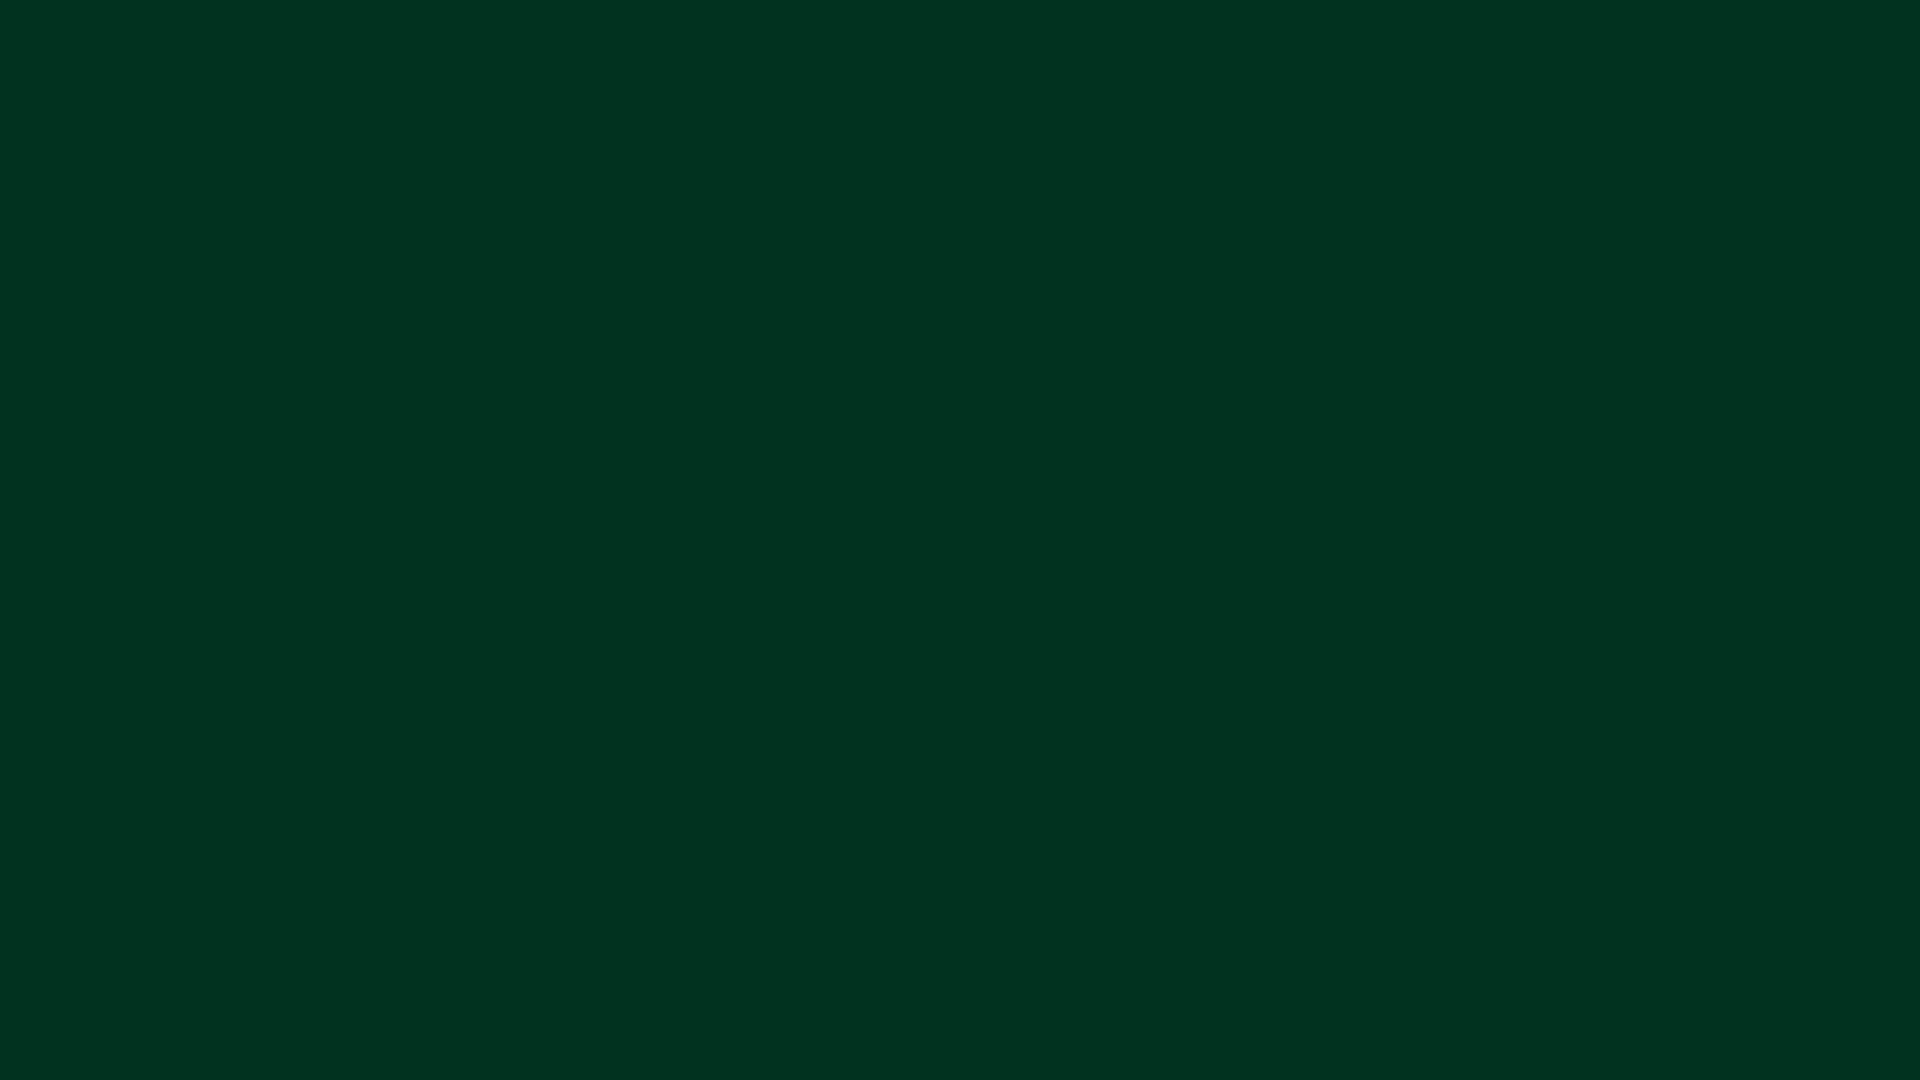 Solid Dark Green Backgrounds Images Pictures Becuo